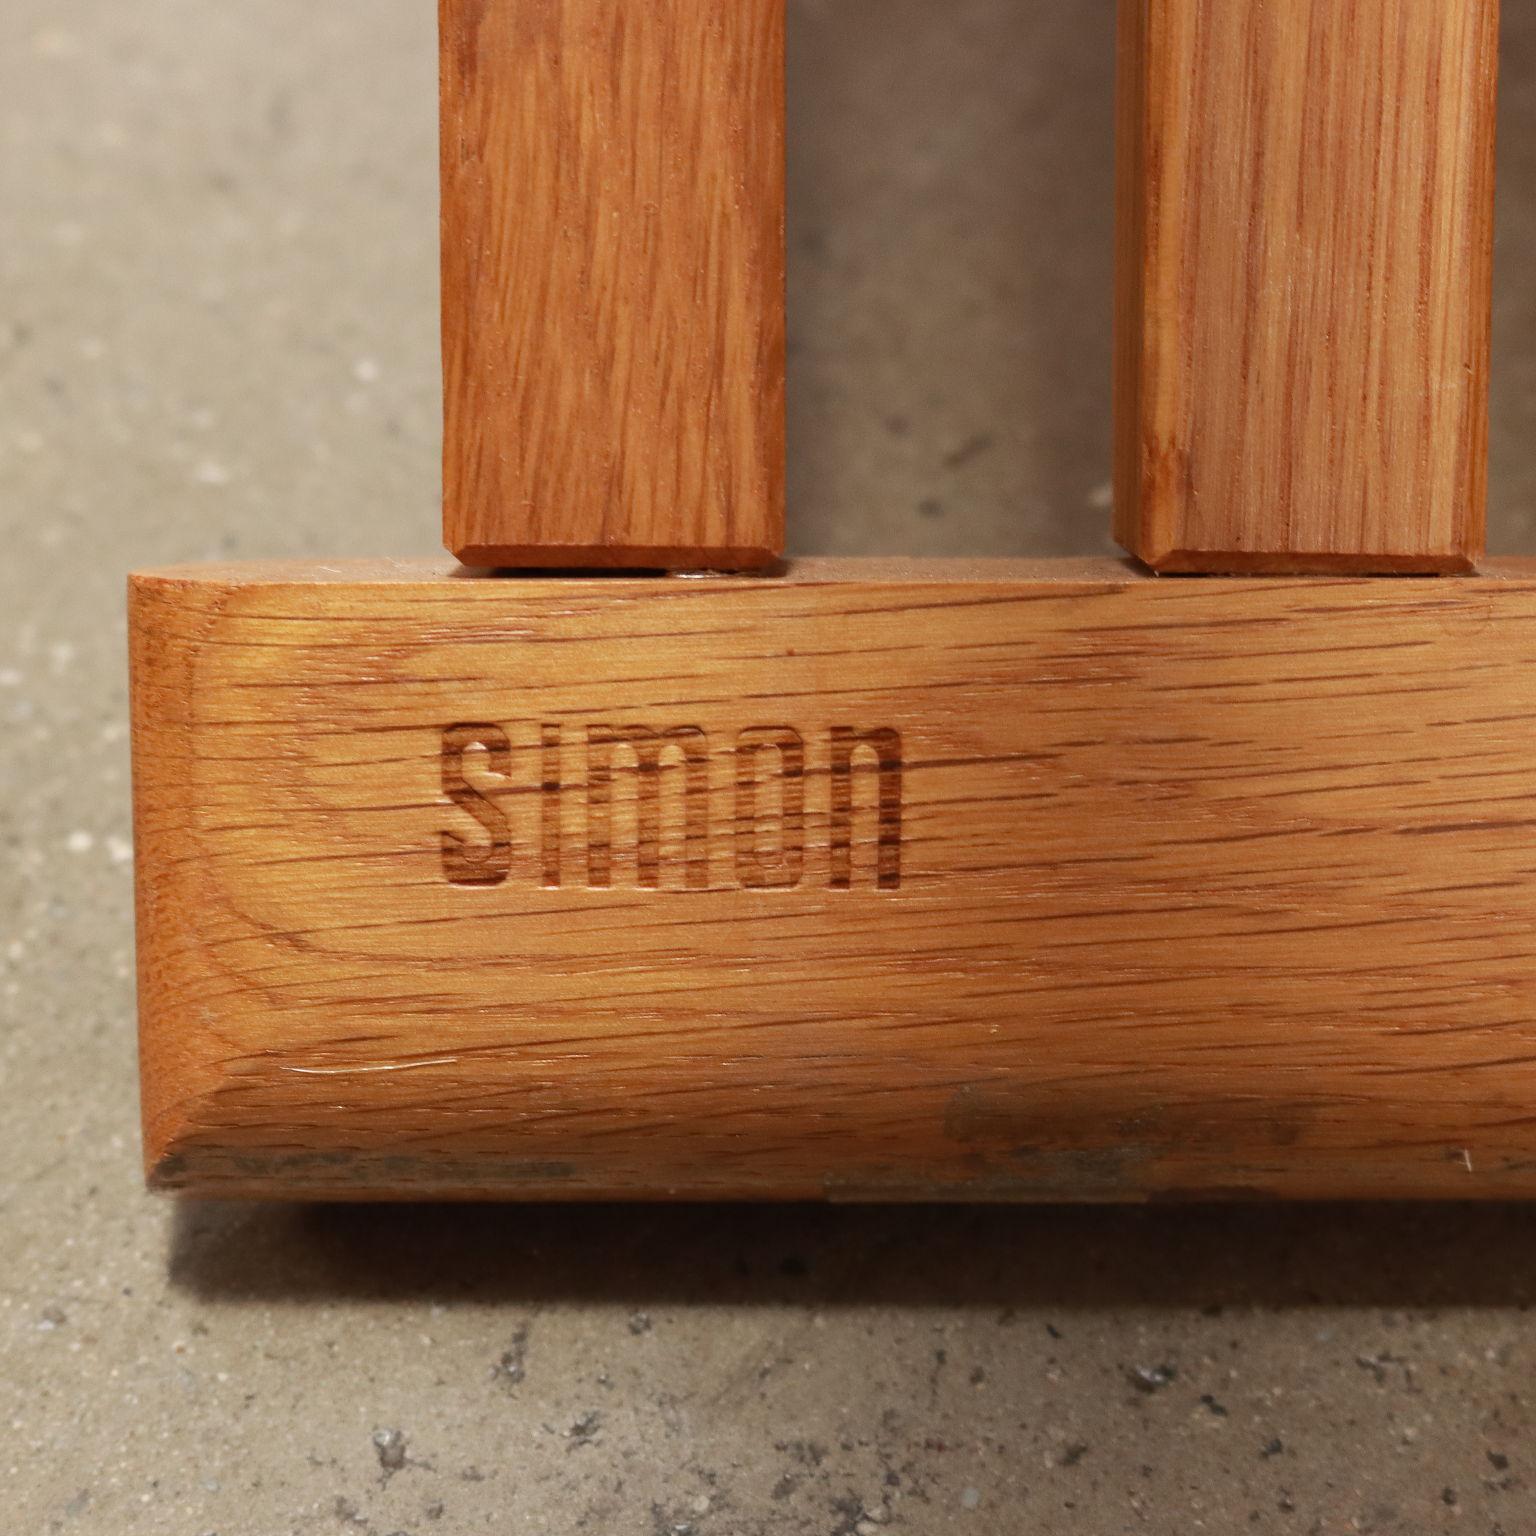 'Tomasa' chairs for Simon 80s For Sale 1